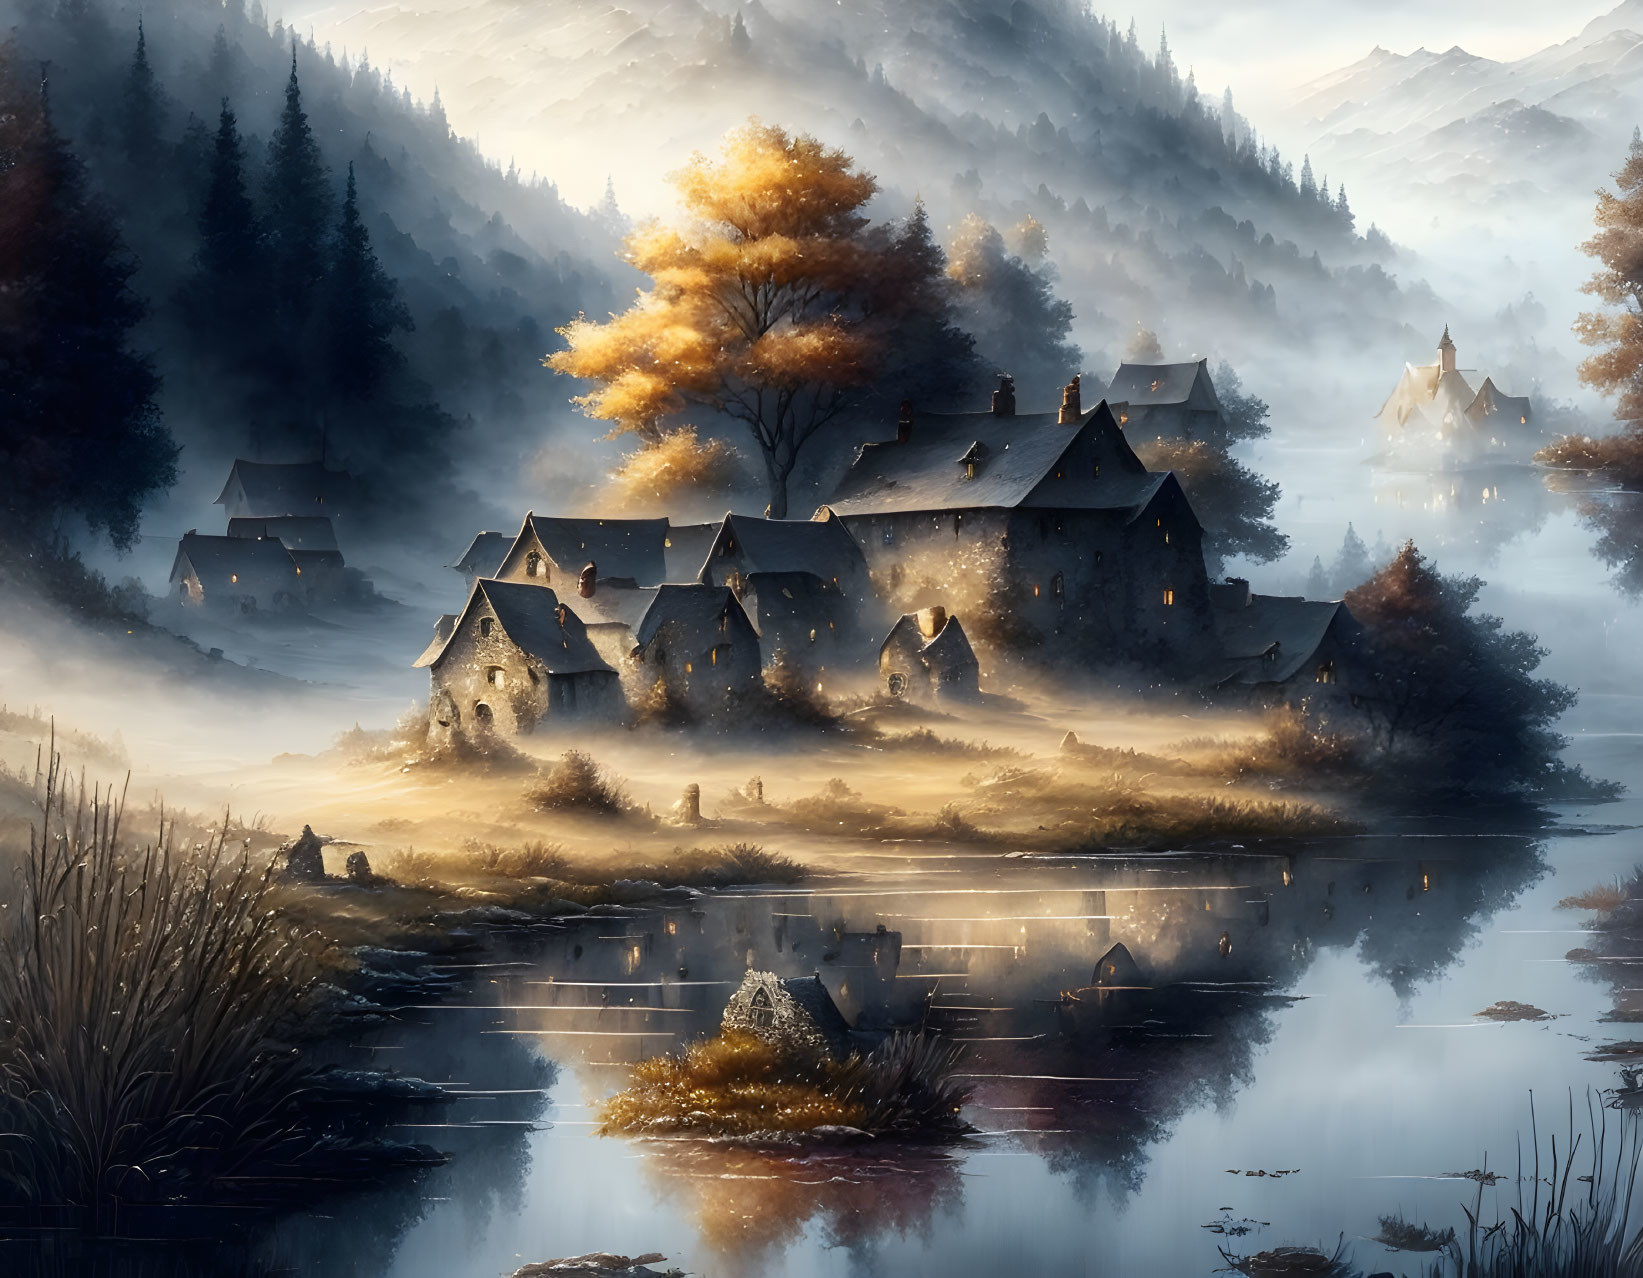 A fantasy landscape with an old village